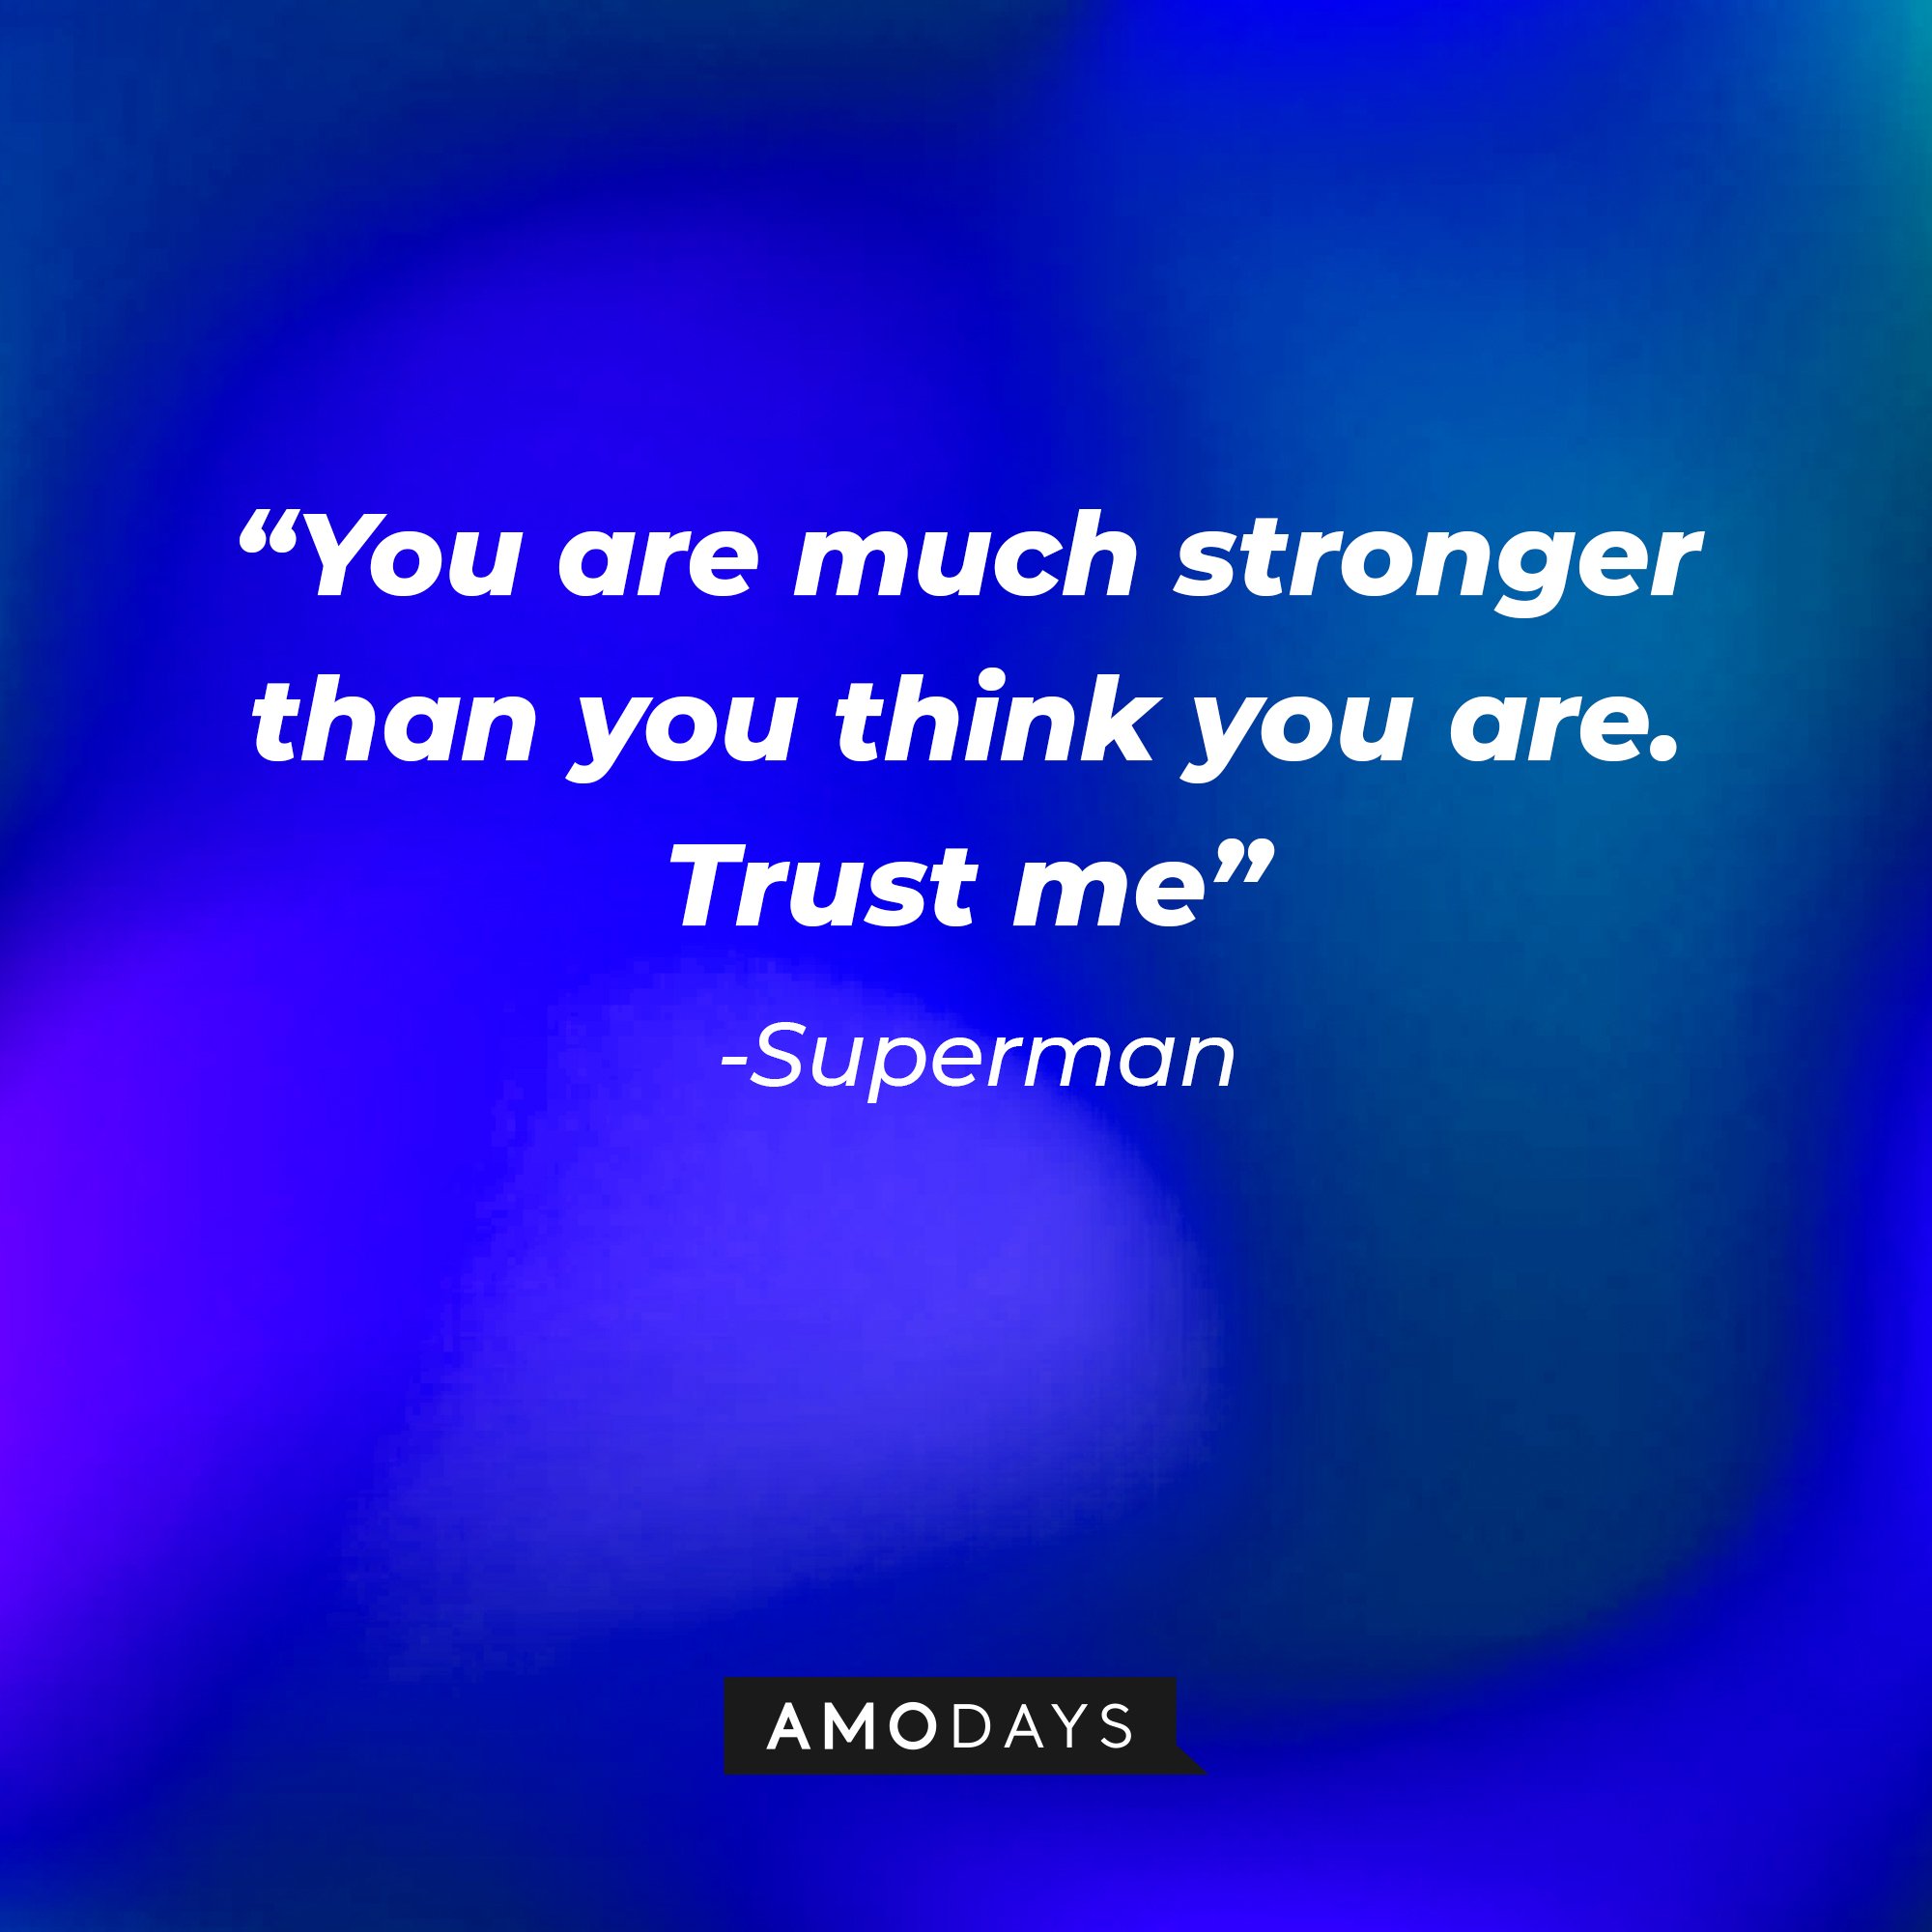 Superman's quote: “You are much stronger than you think you are. Trust me” | Image: AmoDays